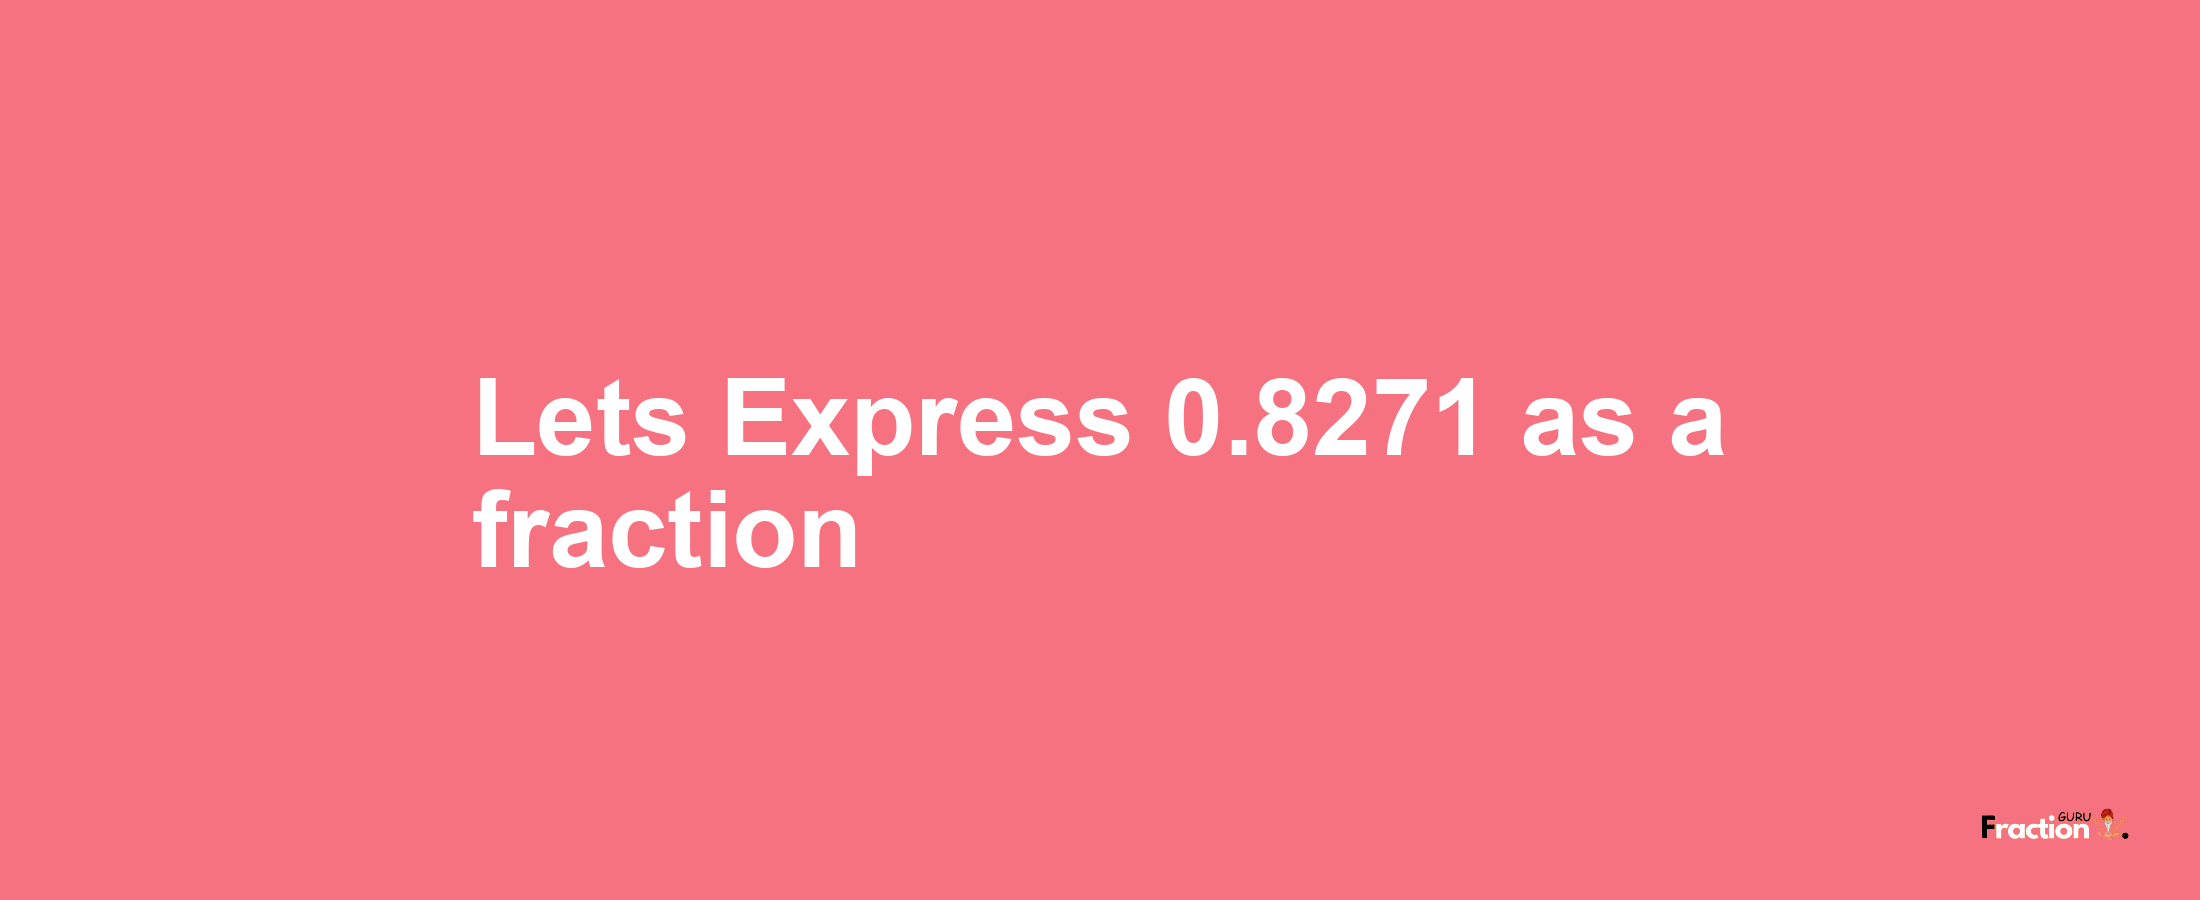 Lets Express 0.8271 as afraction